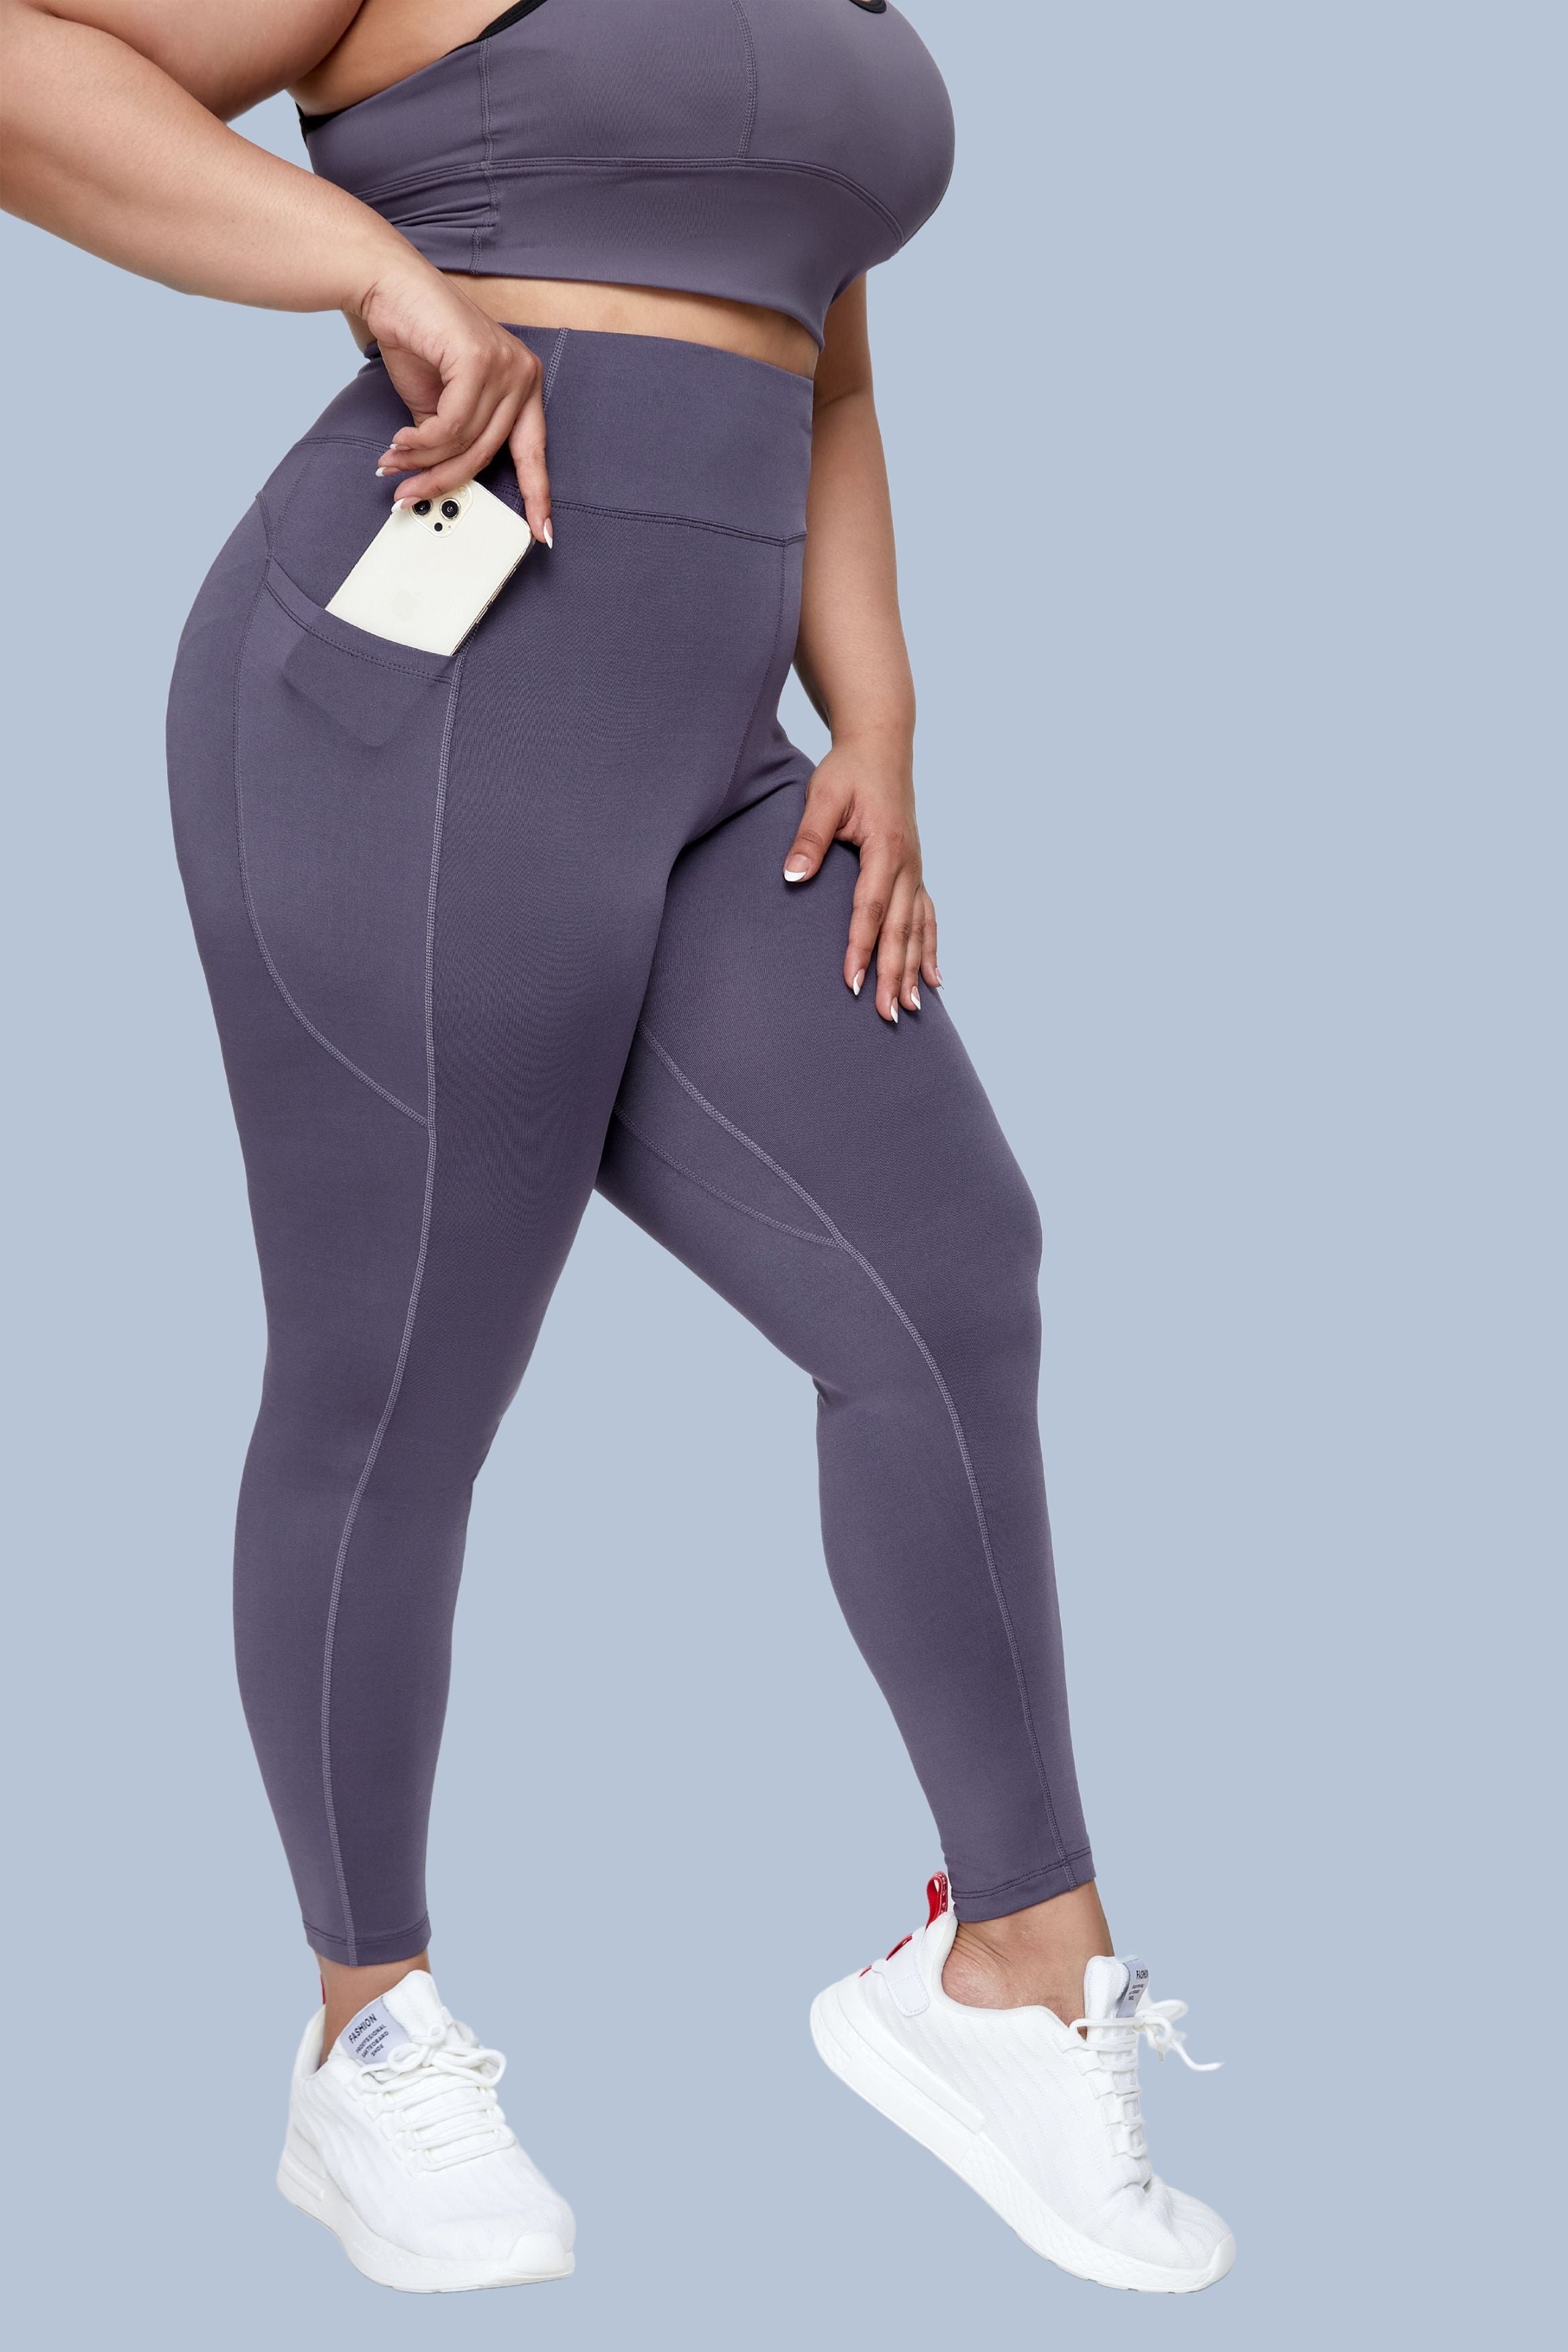 Plus Size Wave Print See Through Stacked Leggings Lightweight High Waisted  for Womens Girls Grey S at  Women's Clothing store